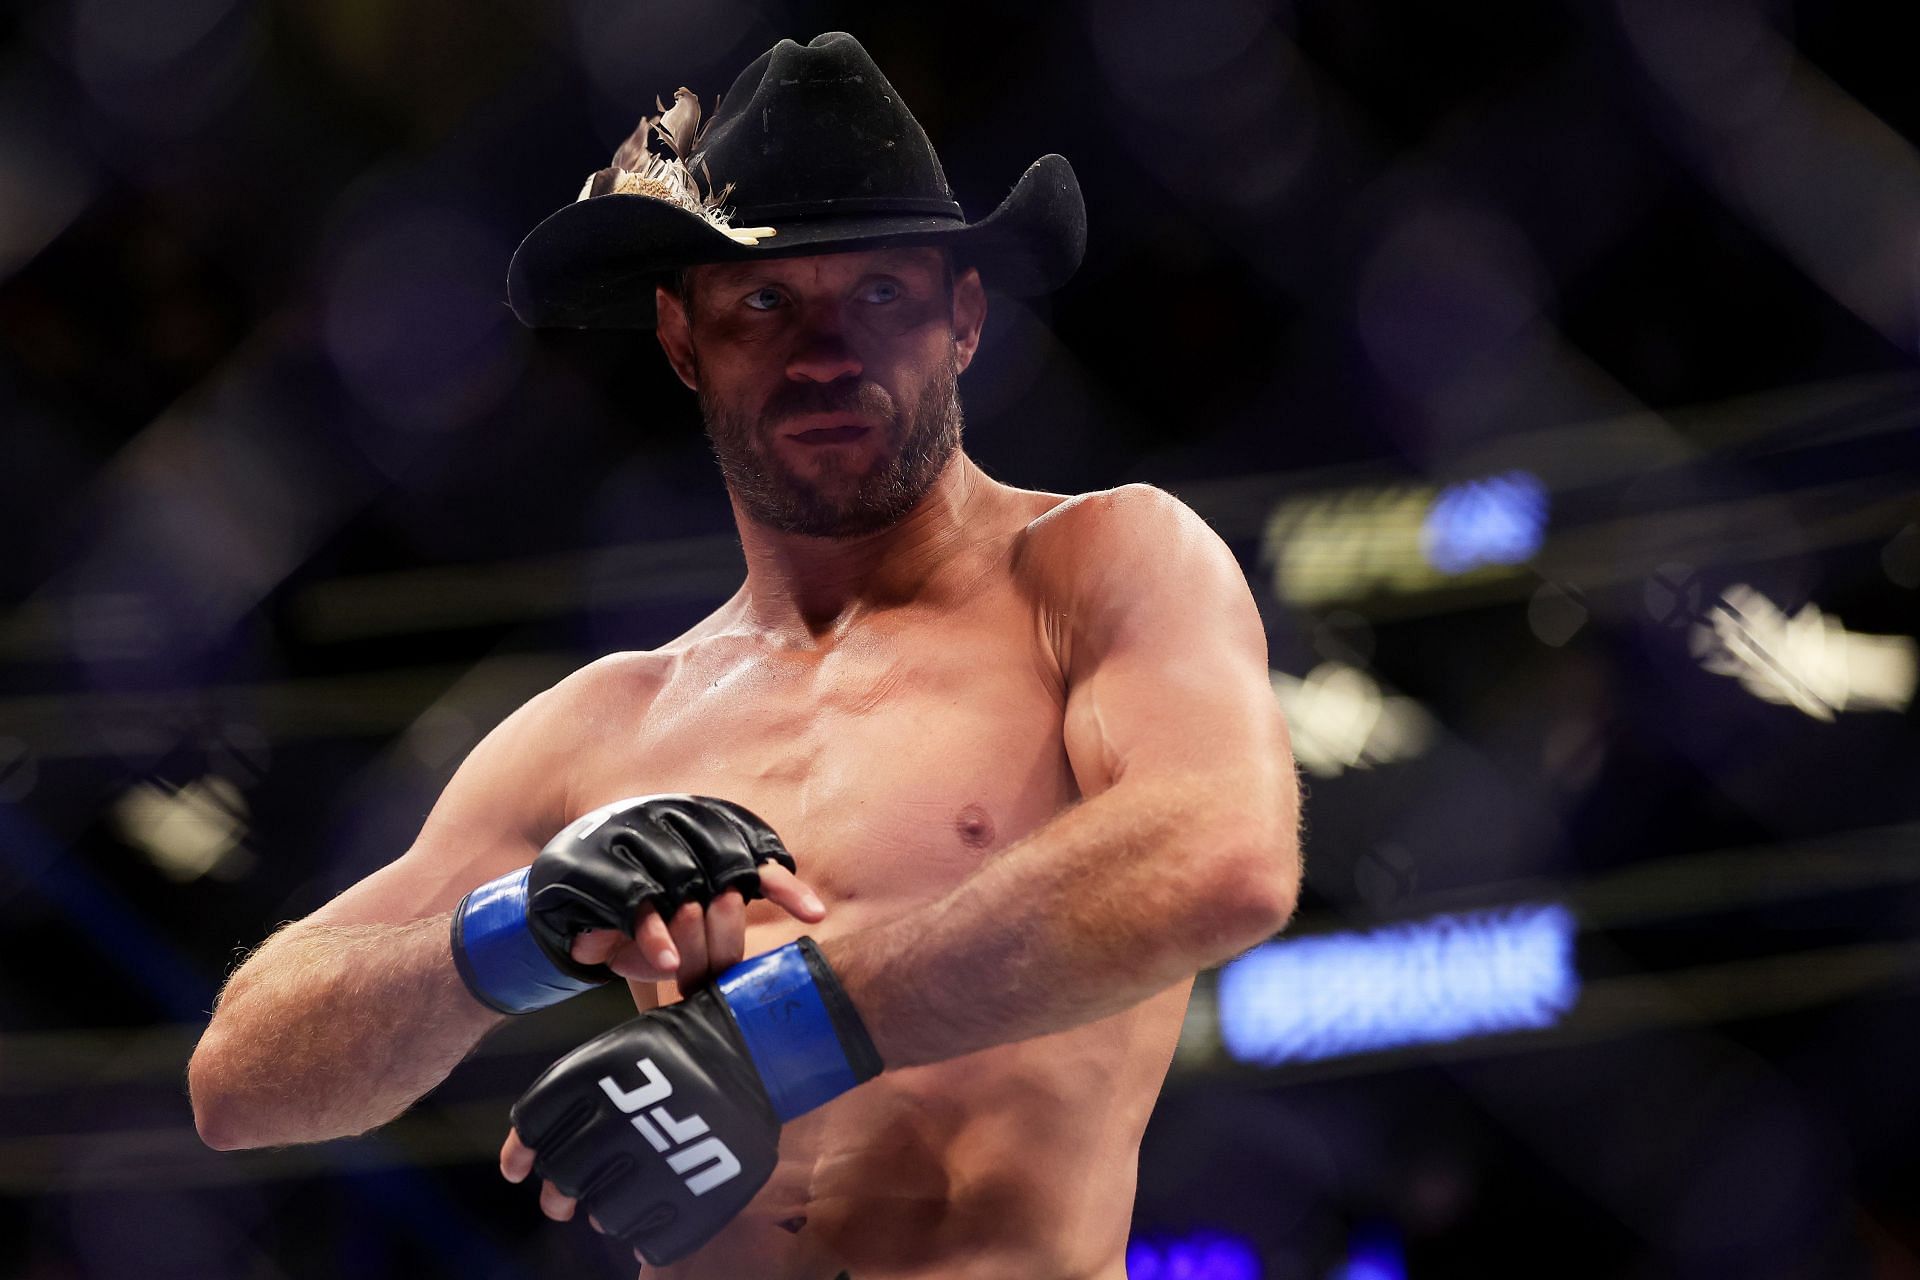 Donald Cerrone may have stuck around for a little too long before retiring last weekend